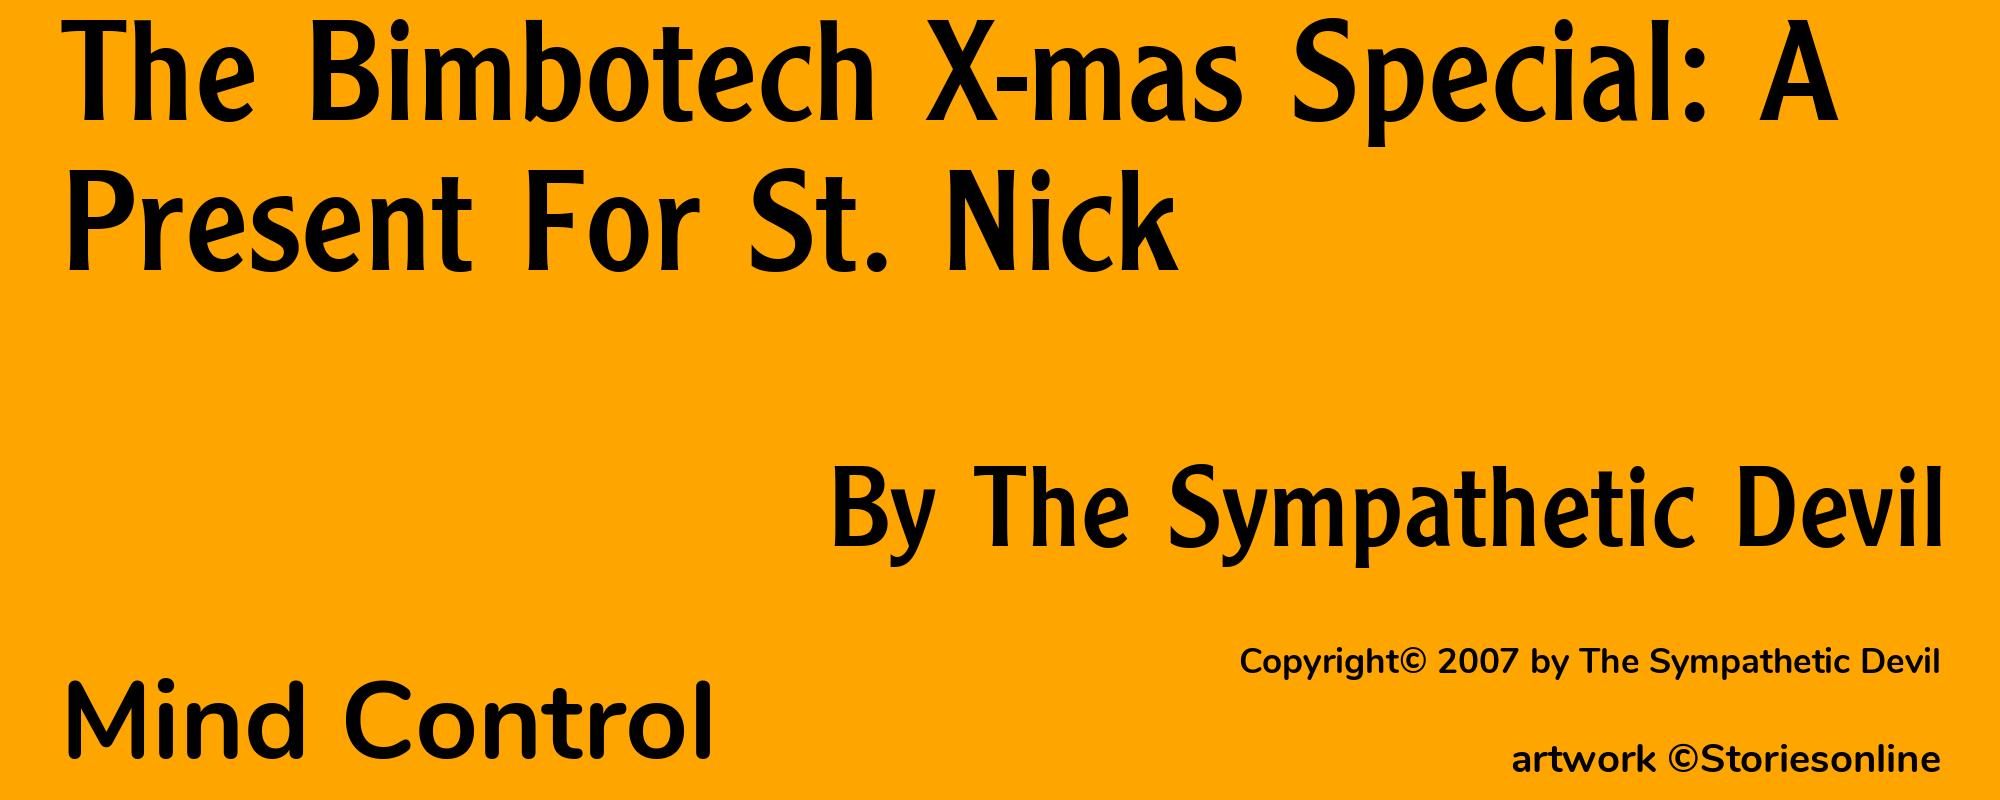 The Bimbotech X-mas Special: A Present For St. Nick - Cover